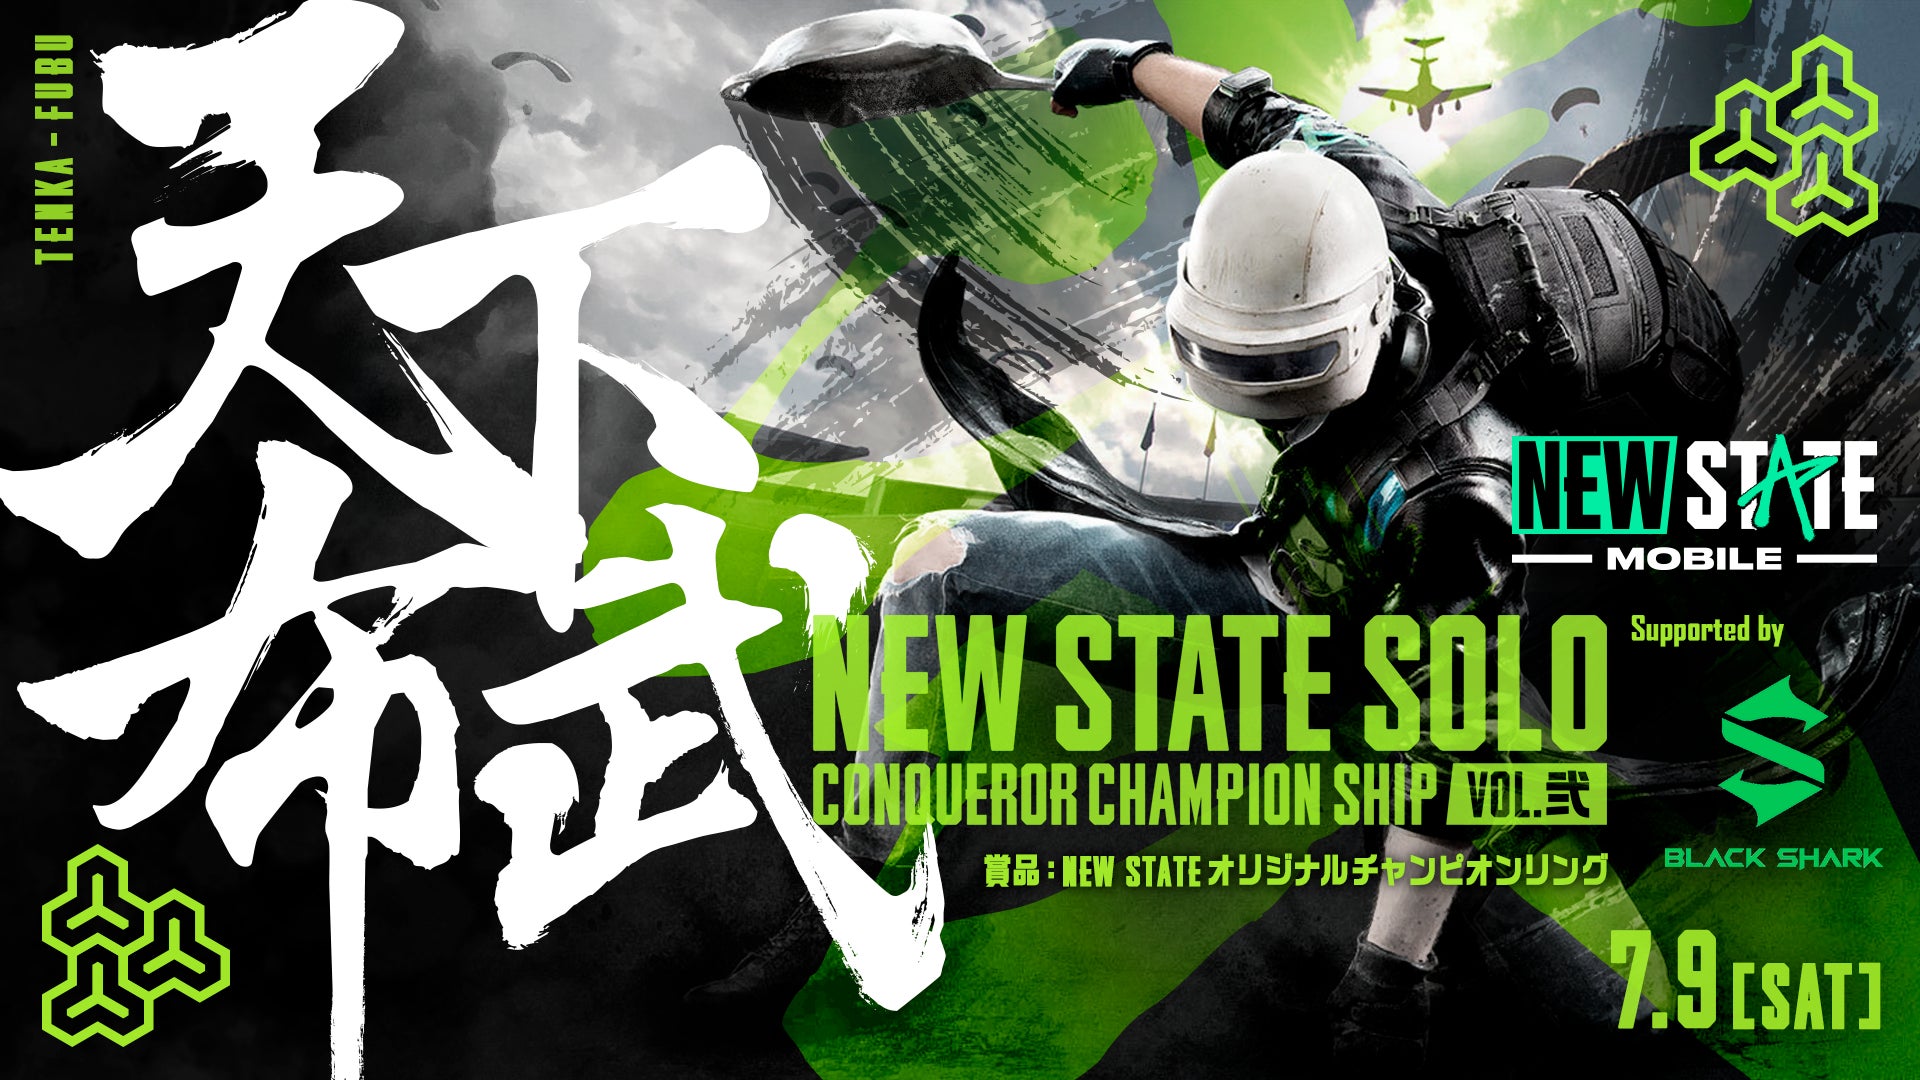 Solo最強を決める公式大会『~天下布武~NEW STATE SOLO Conqueror Champion Ship Vol.2 』 参加受付開始!